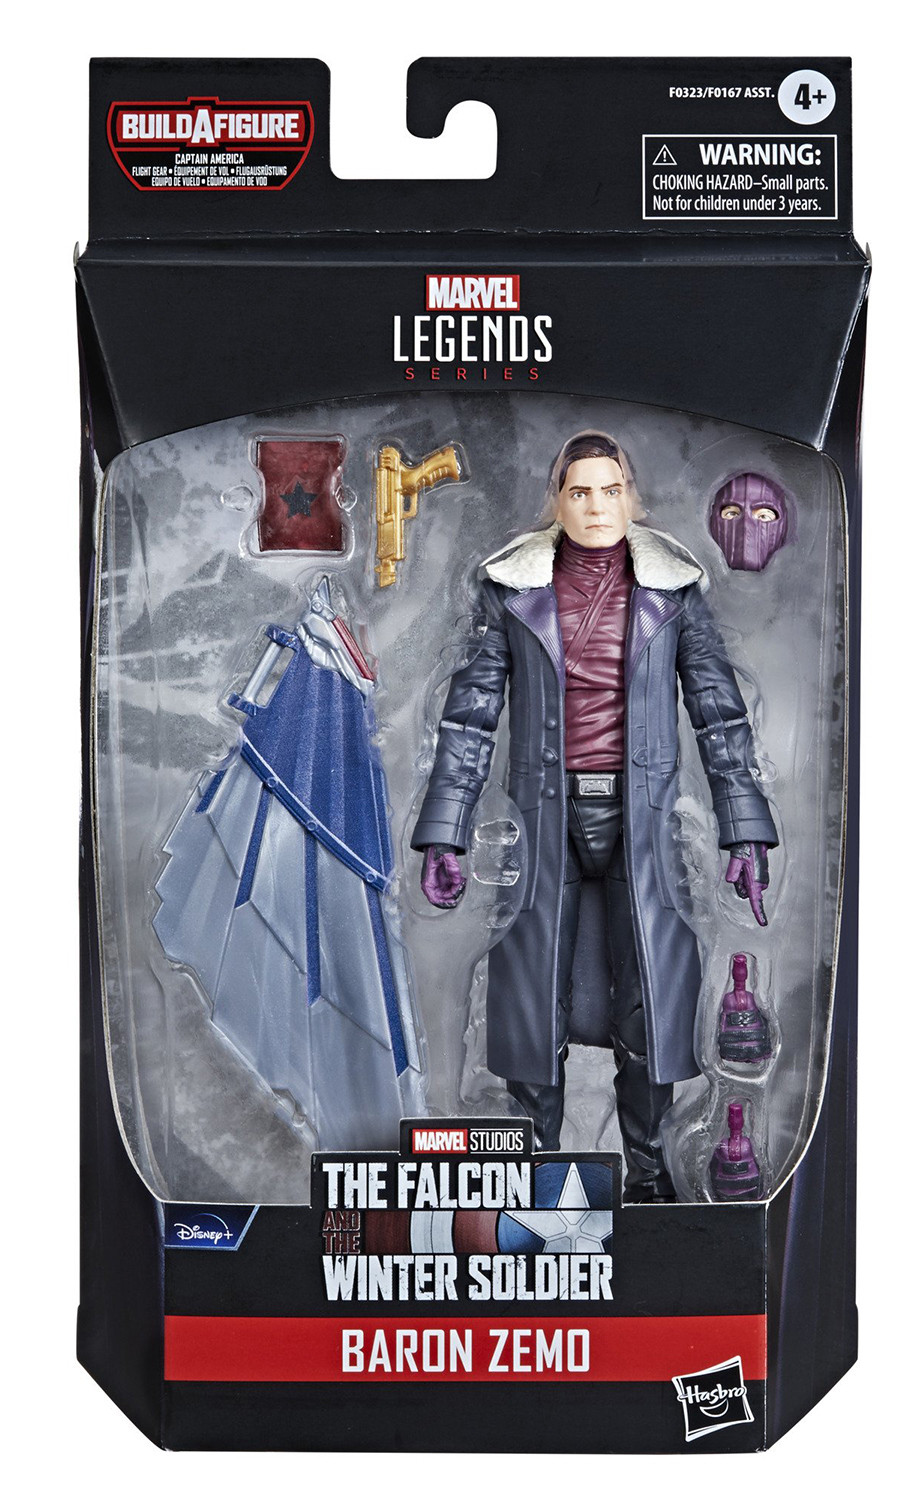  Marvel Legends Series: The Falcon And The Winter Solider  Baron Zemo (15 )